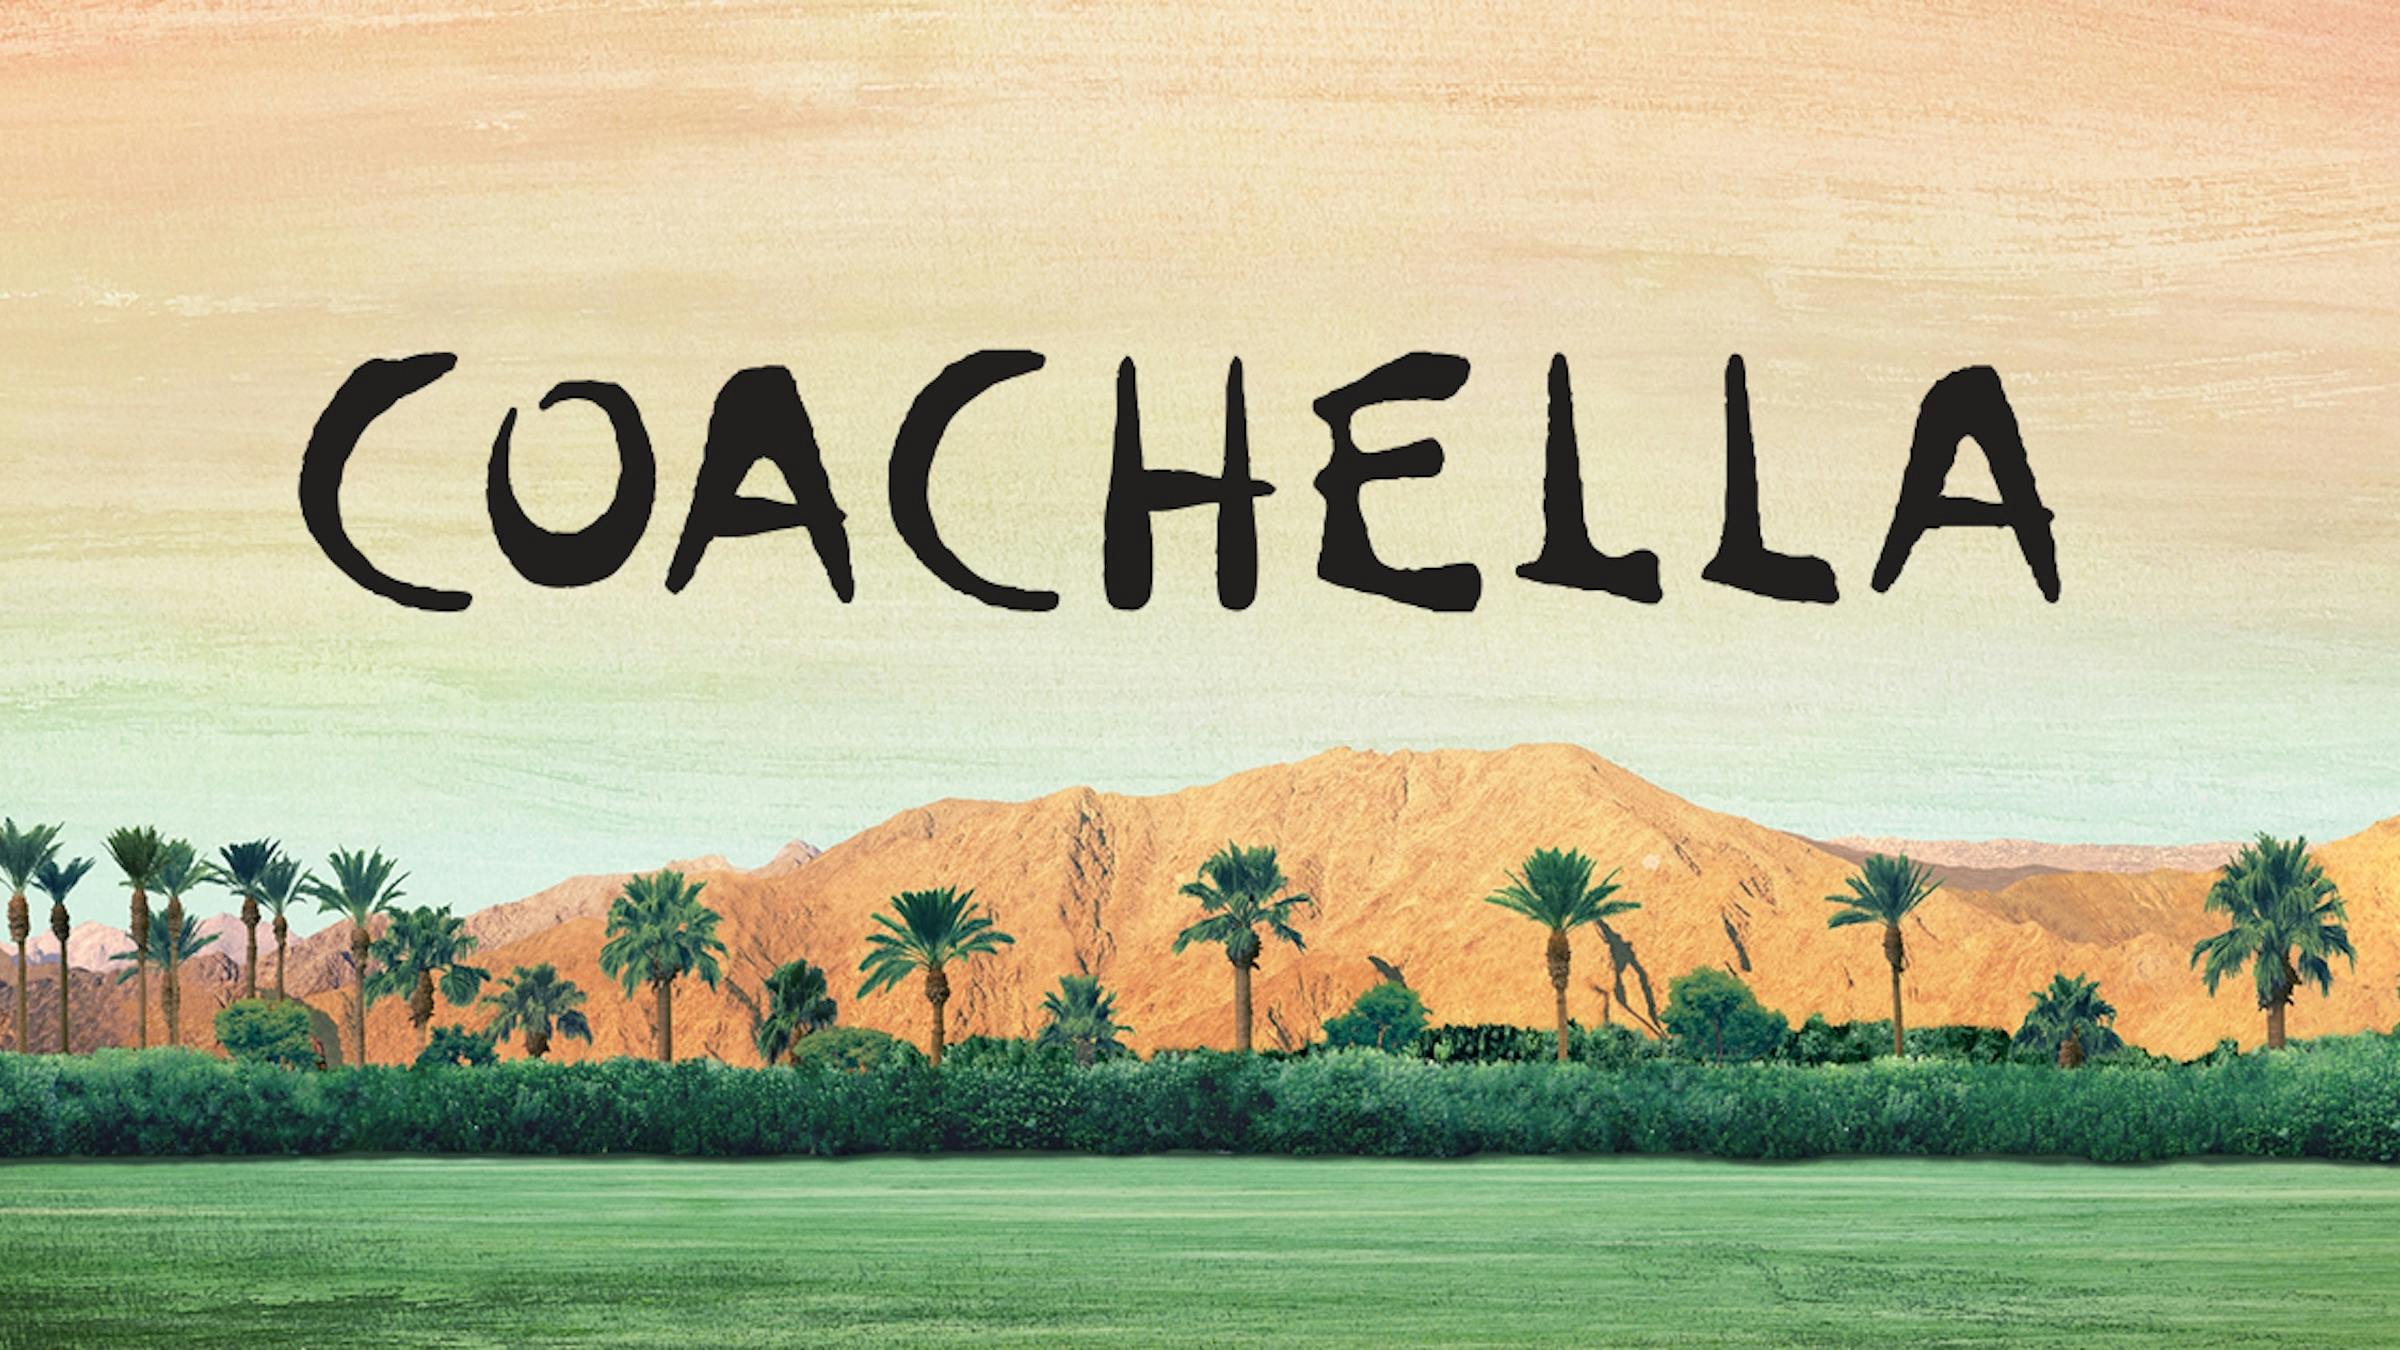 Coachella 2020 Is Reportedly Cancelled